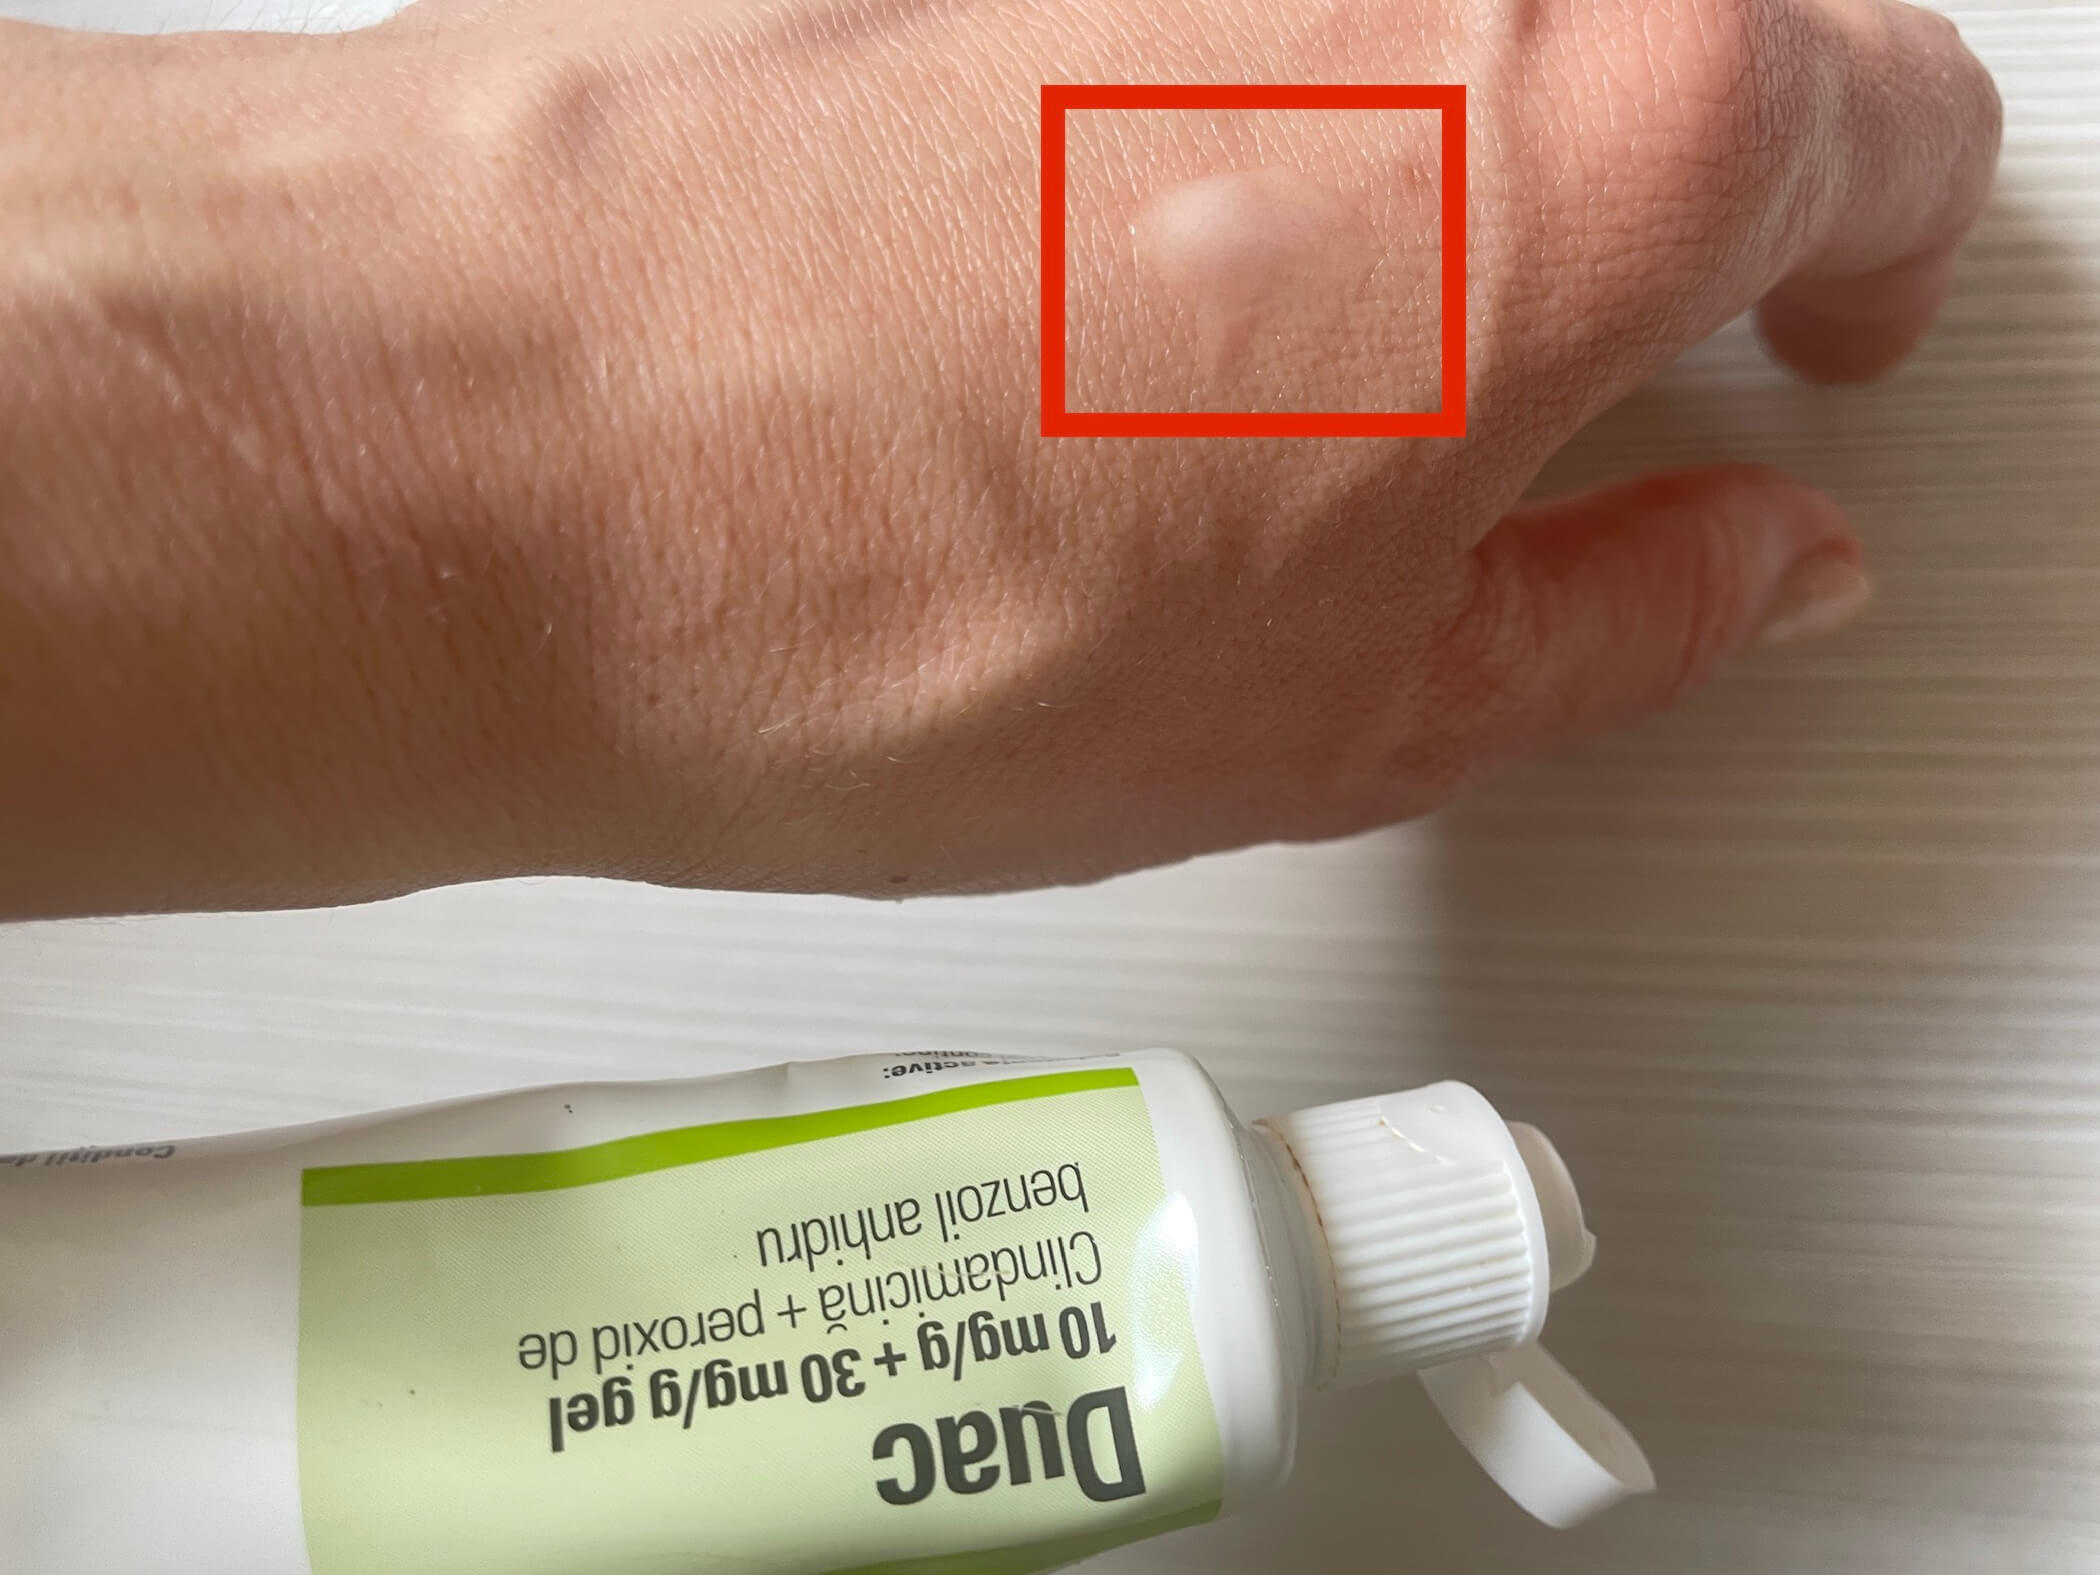 recommended amount of benzoyl peroxide to apply on skin